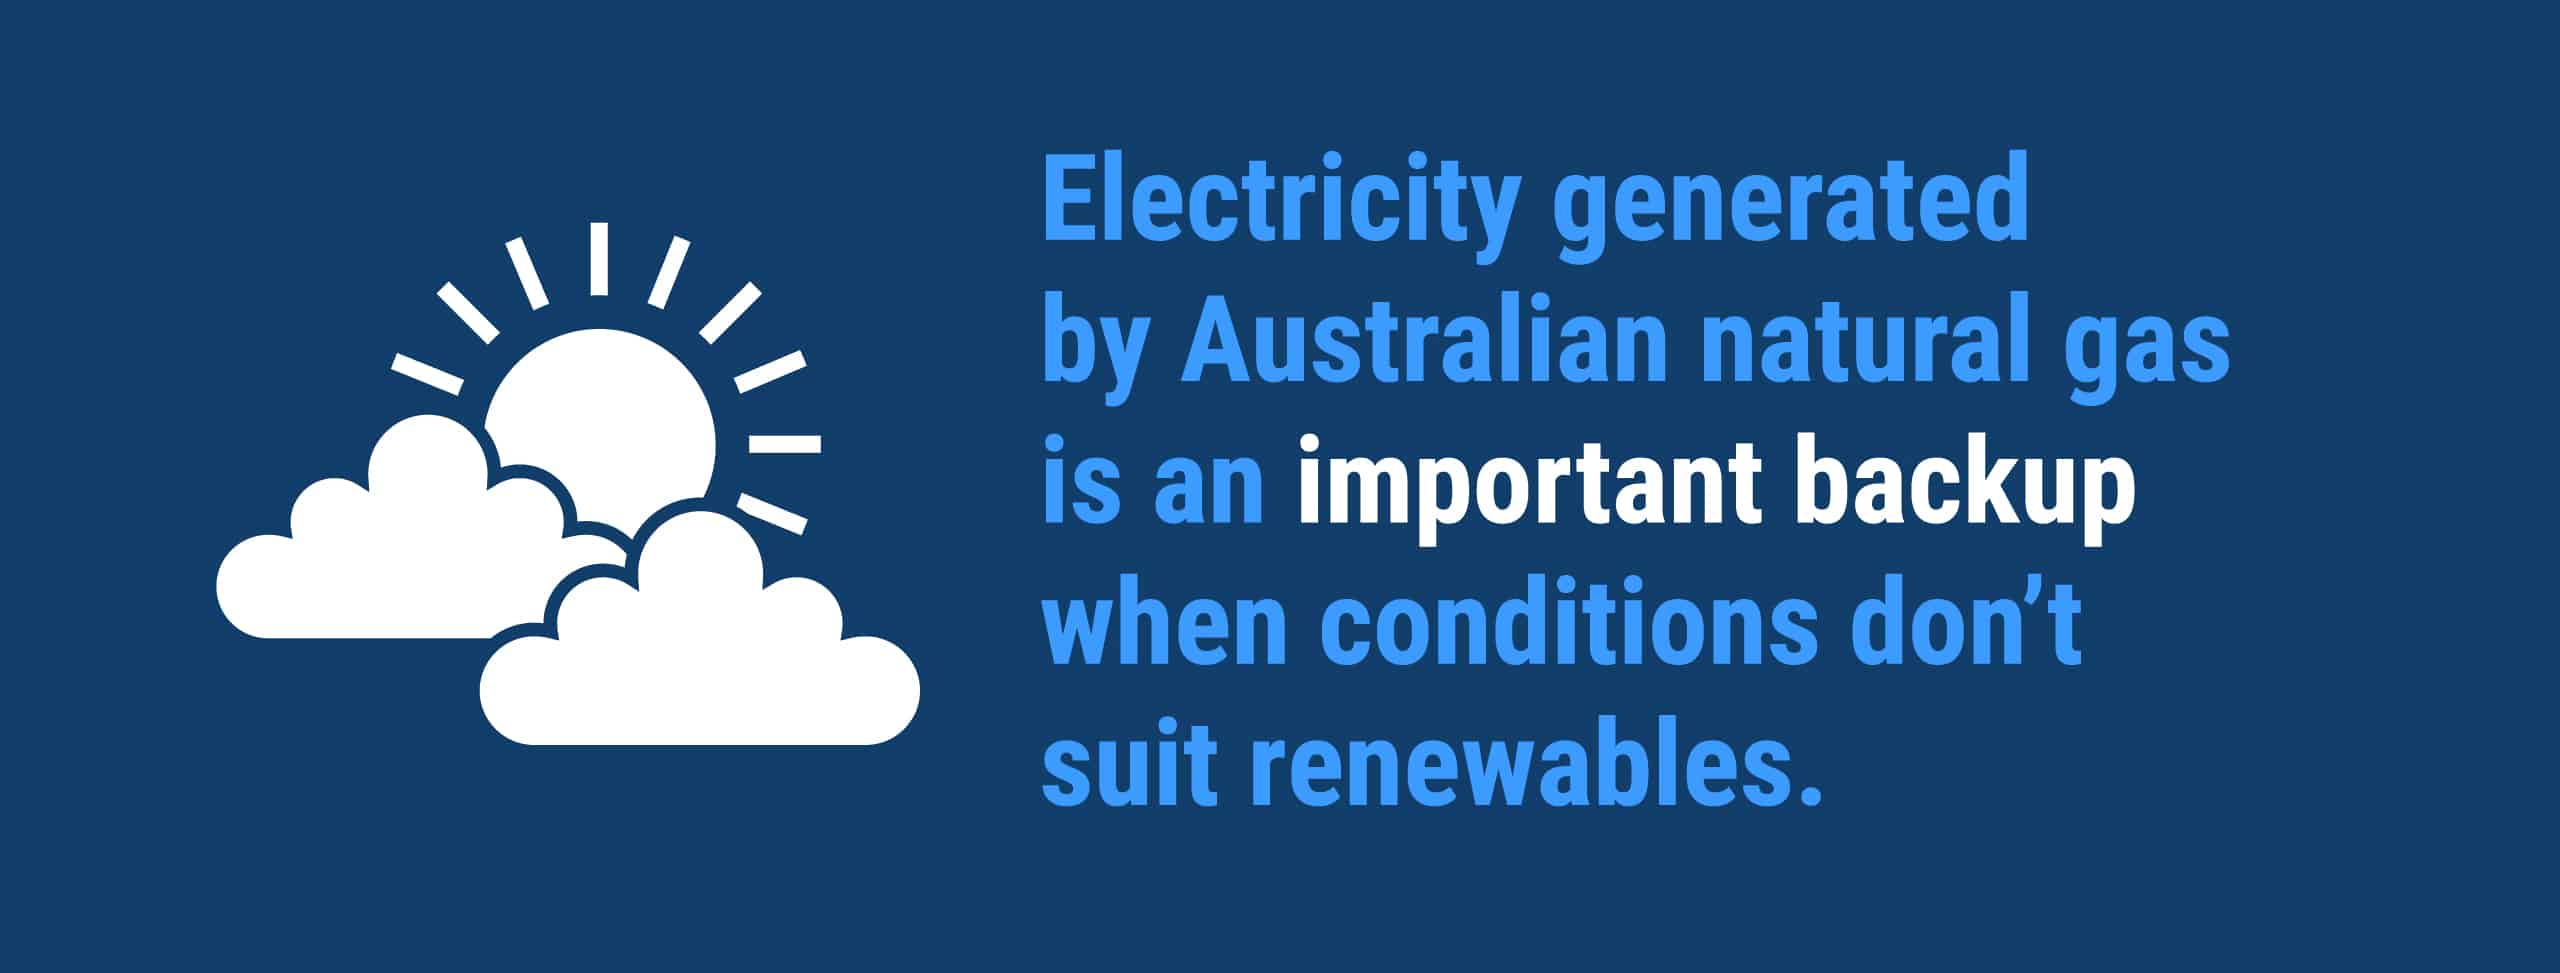 "Electricity generated by Australian natural gas is an important backup when conditions don’t suit renewables."